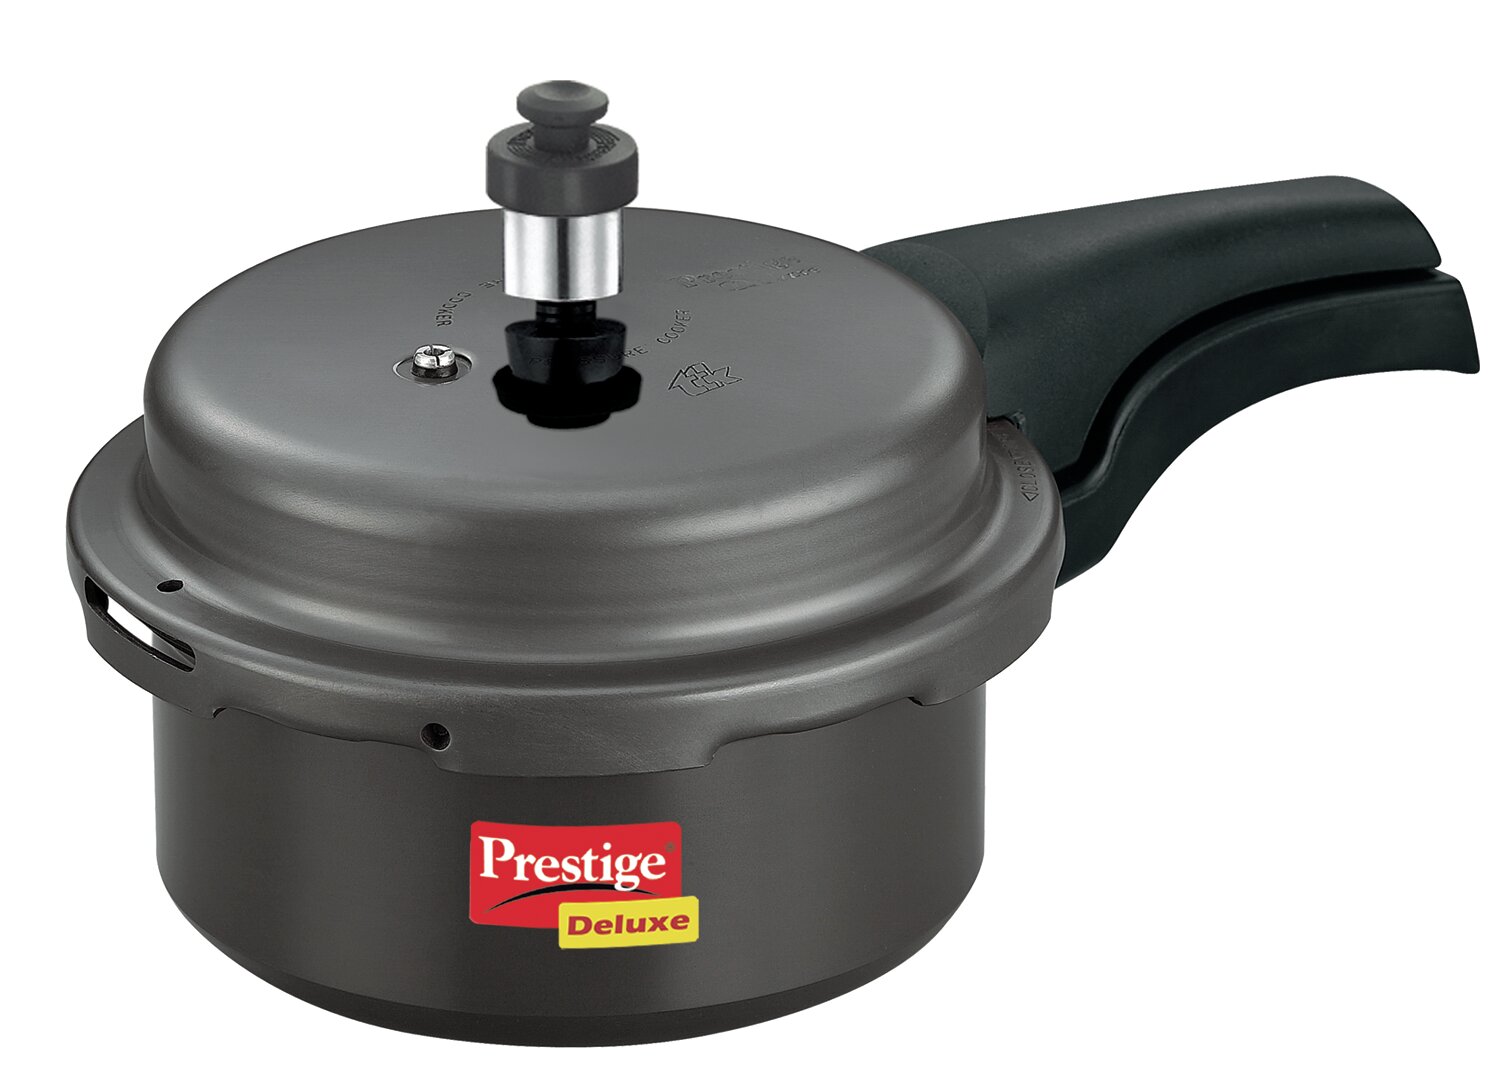 Prestige Cookers Deluxe Hard Anodized Pressure Cooker Reviews